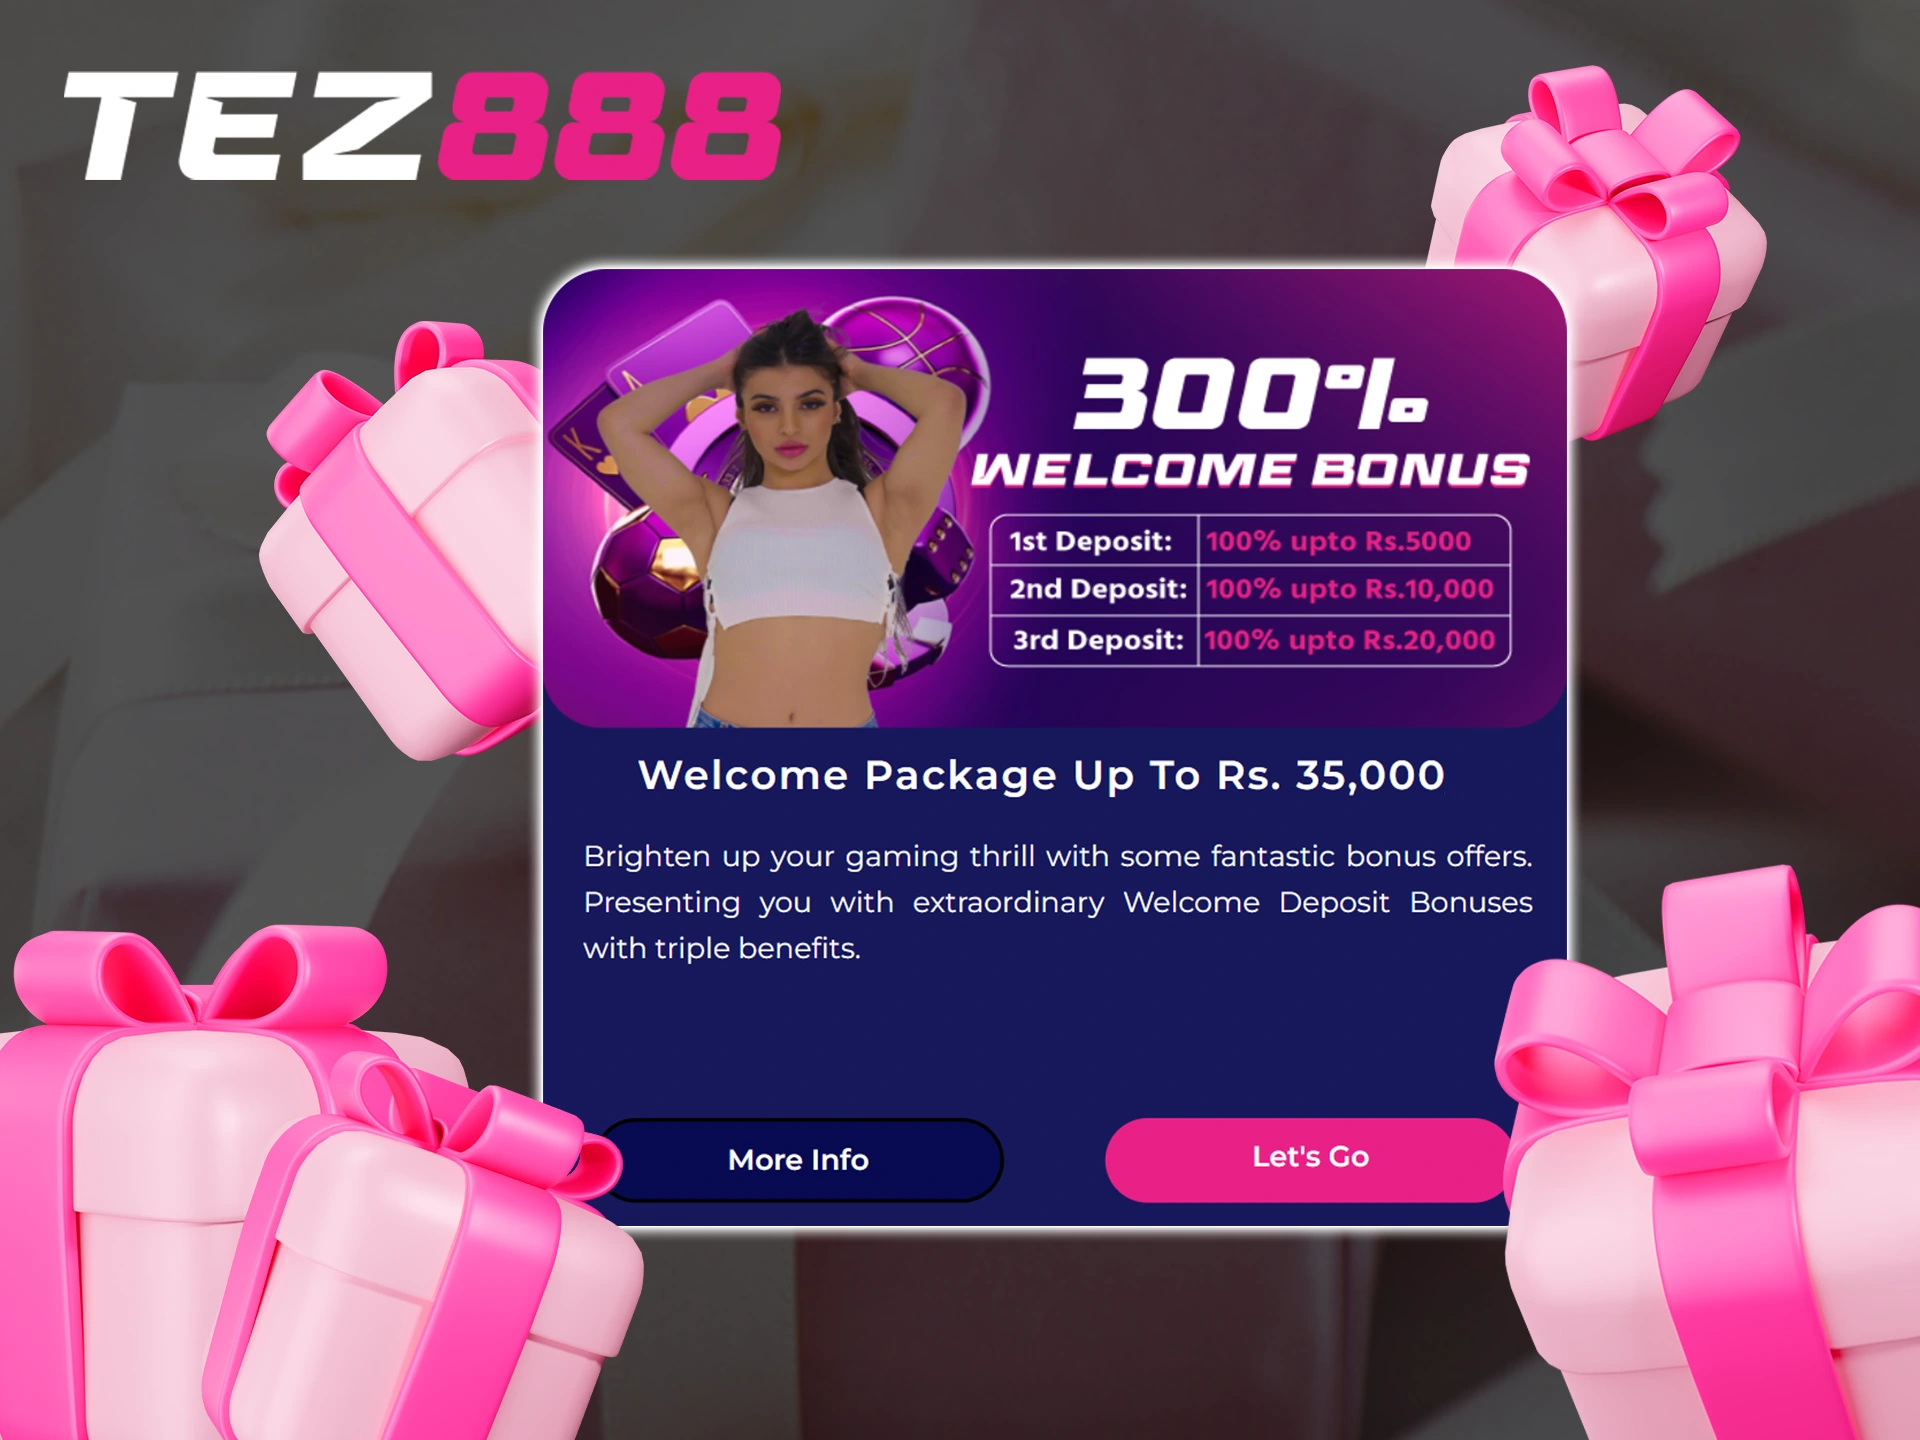 Fund your account balance and get Tez888 welcome bonus.